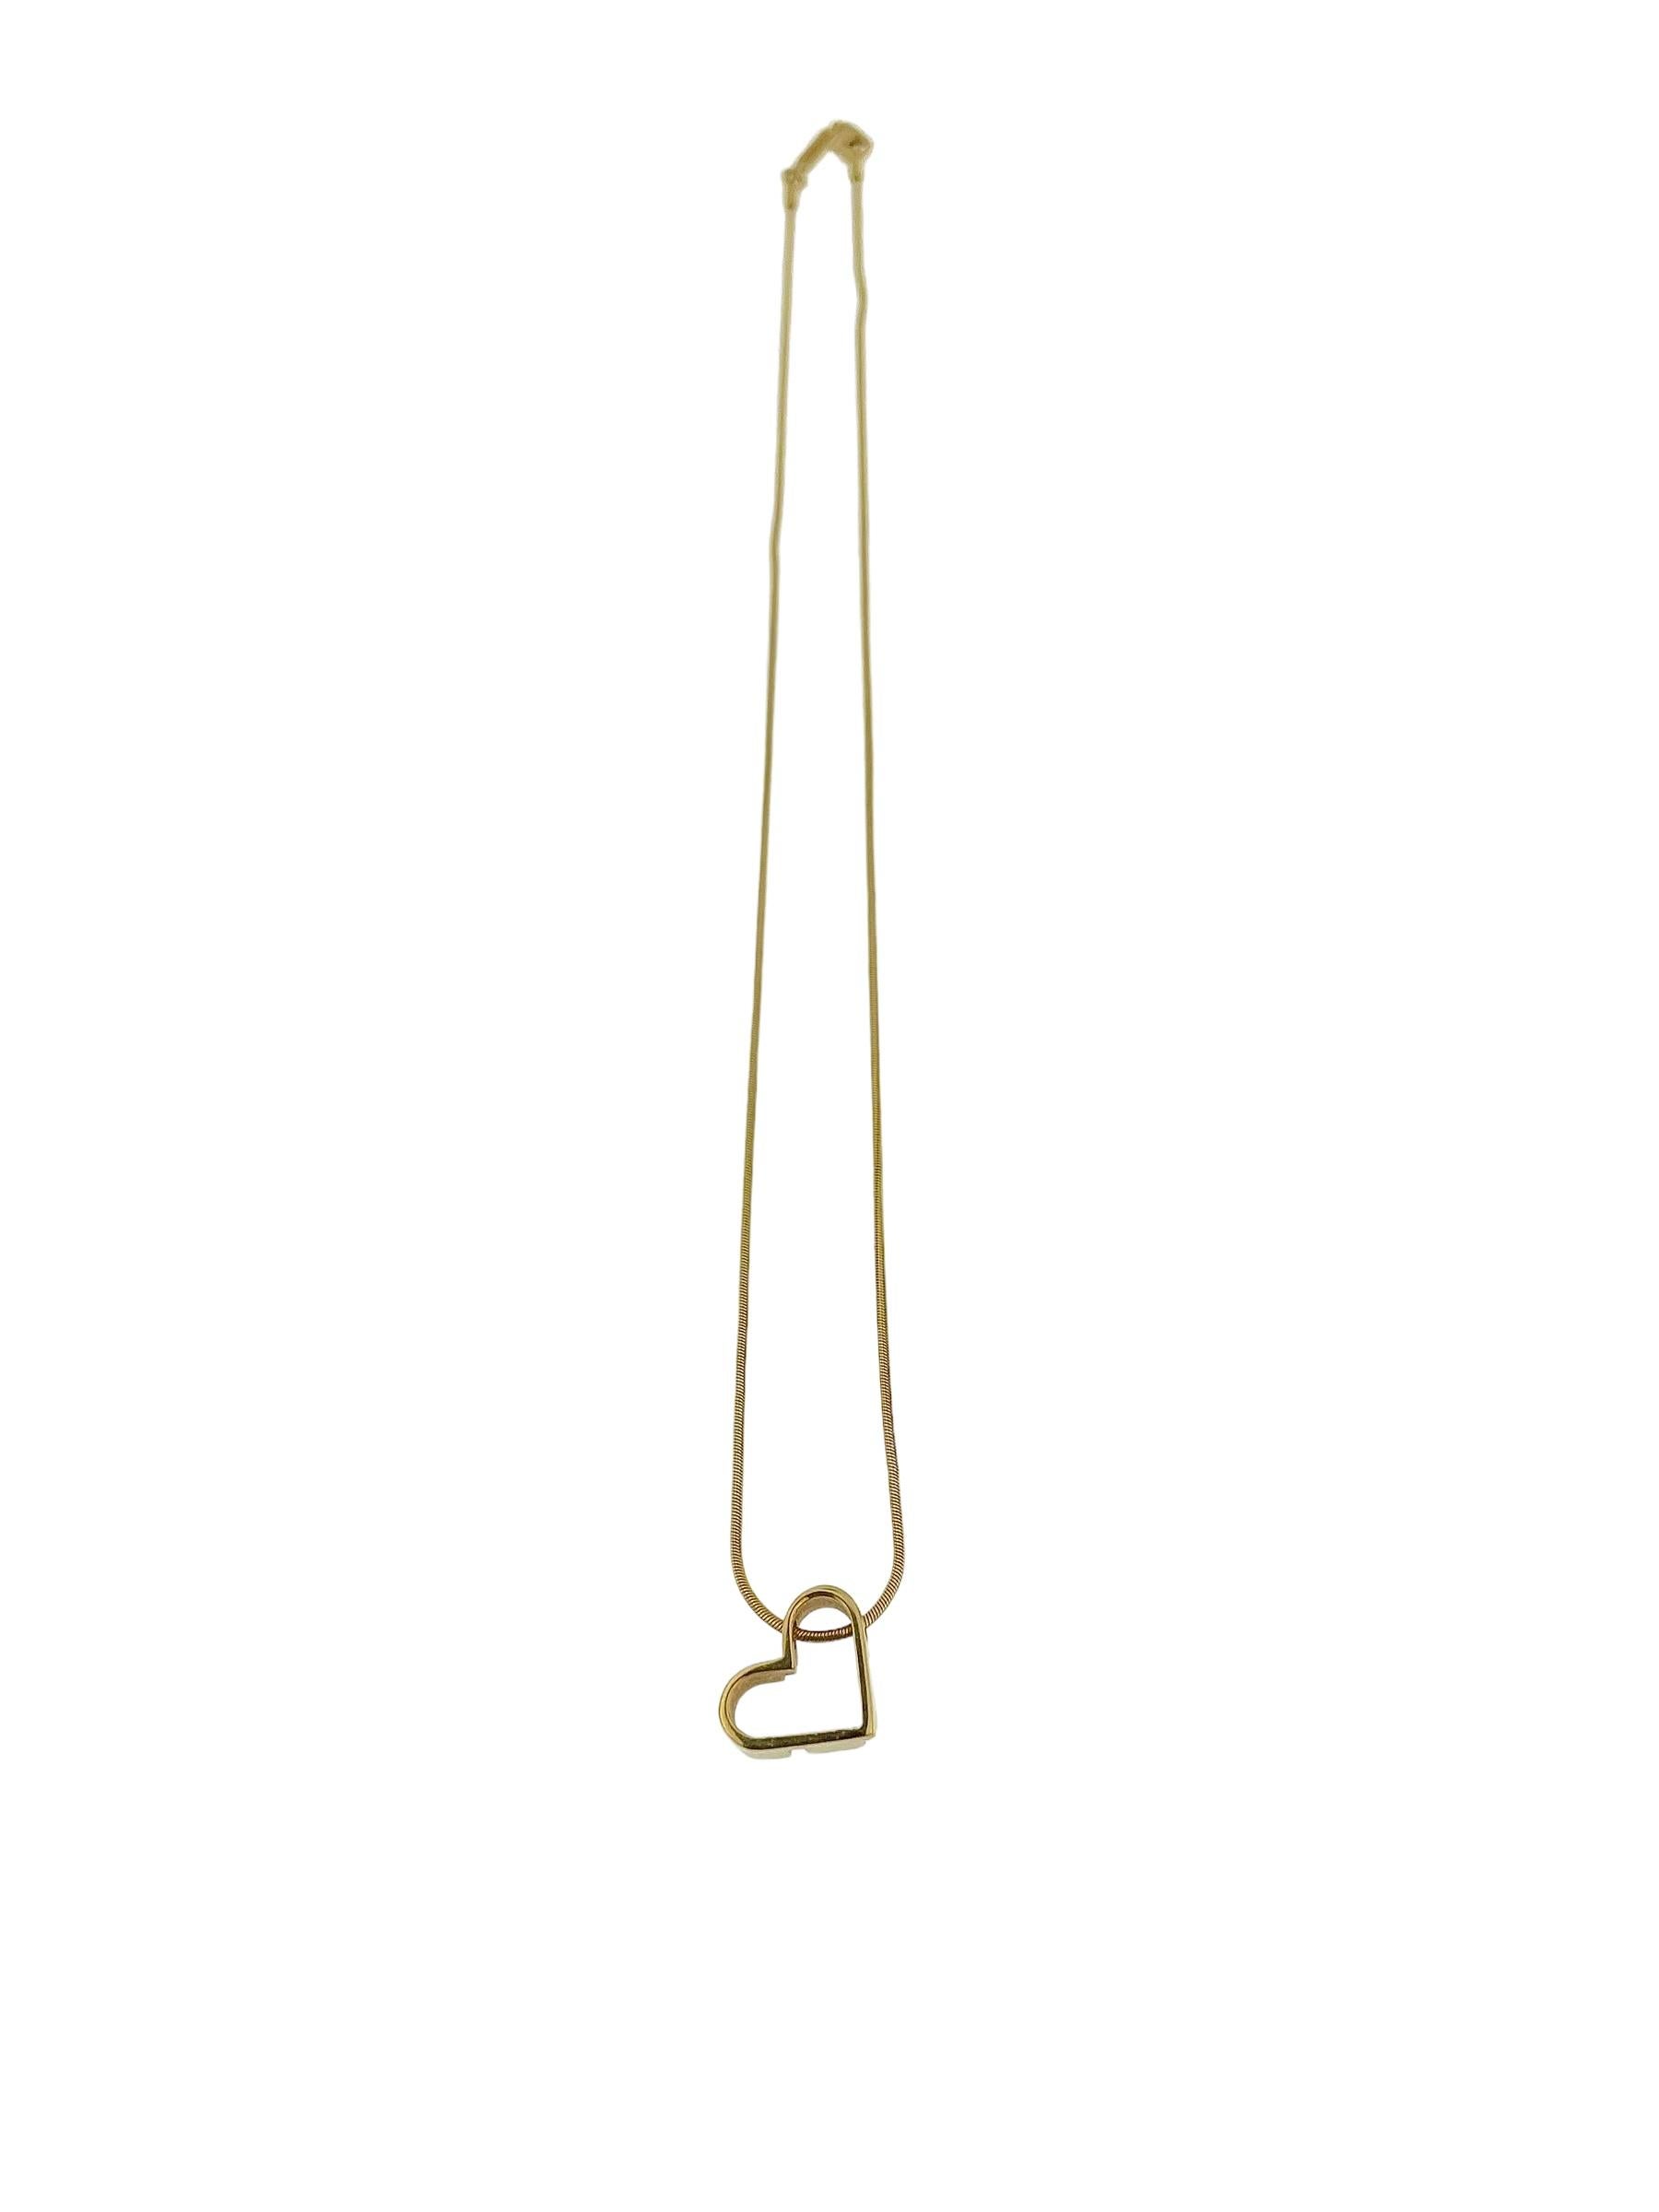 The UnoAErre Yellow Gold Necklace with Heart Pendant is a stunning piece of jewelry that exudes elegance and romance. Crafted from 18-karat yellow gold by UnoAErre, a renowned Italian jewelry brand, this necklace features a timeless tubogas-style